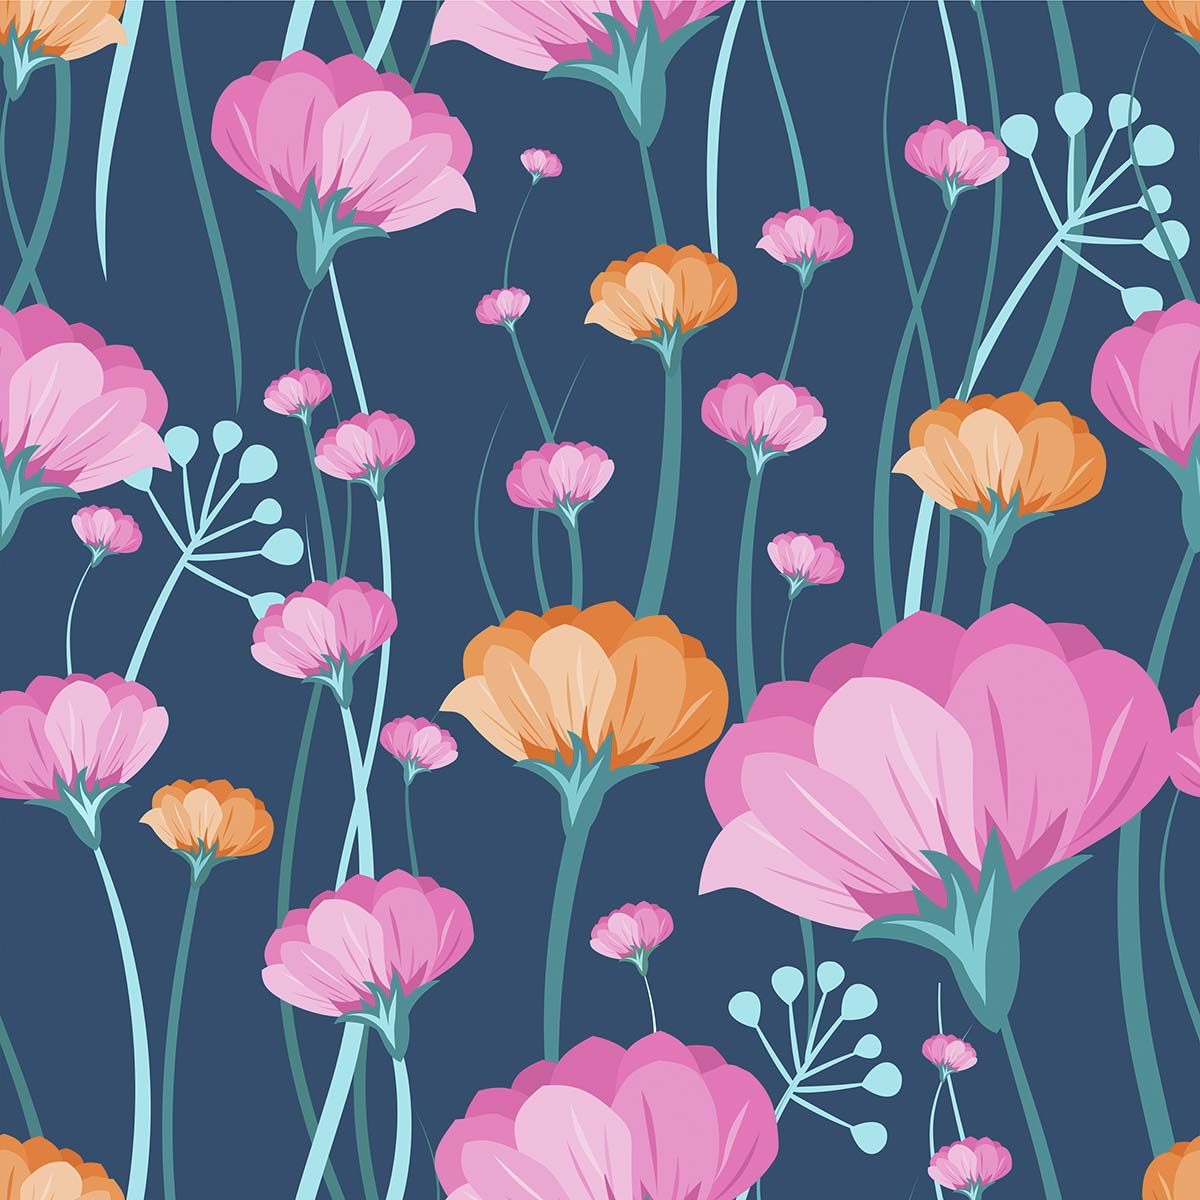 A colorful flowers on a blue background